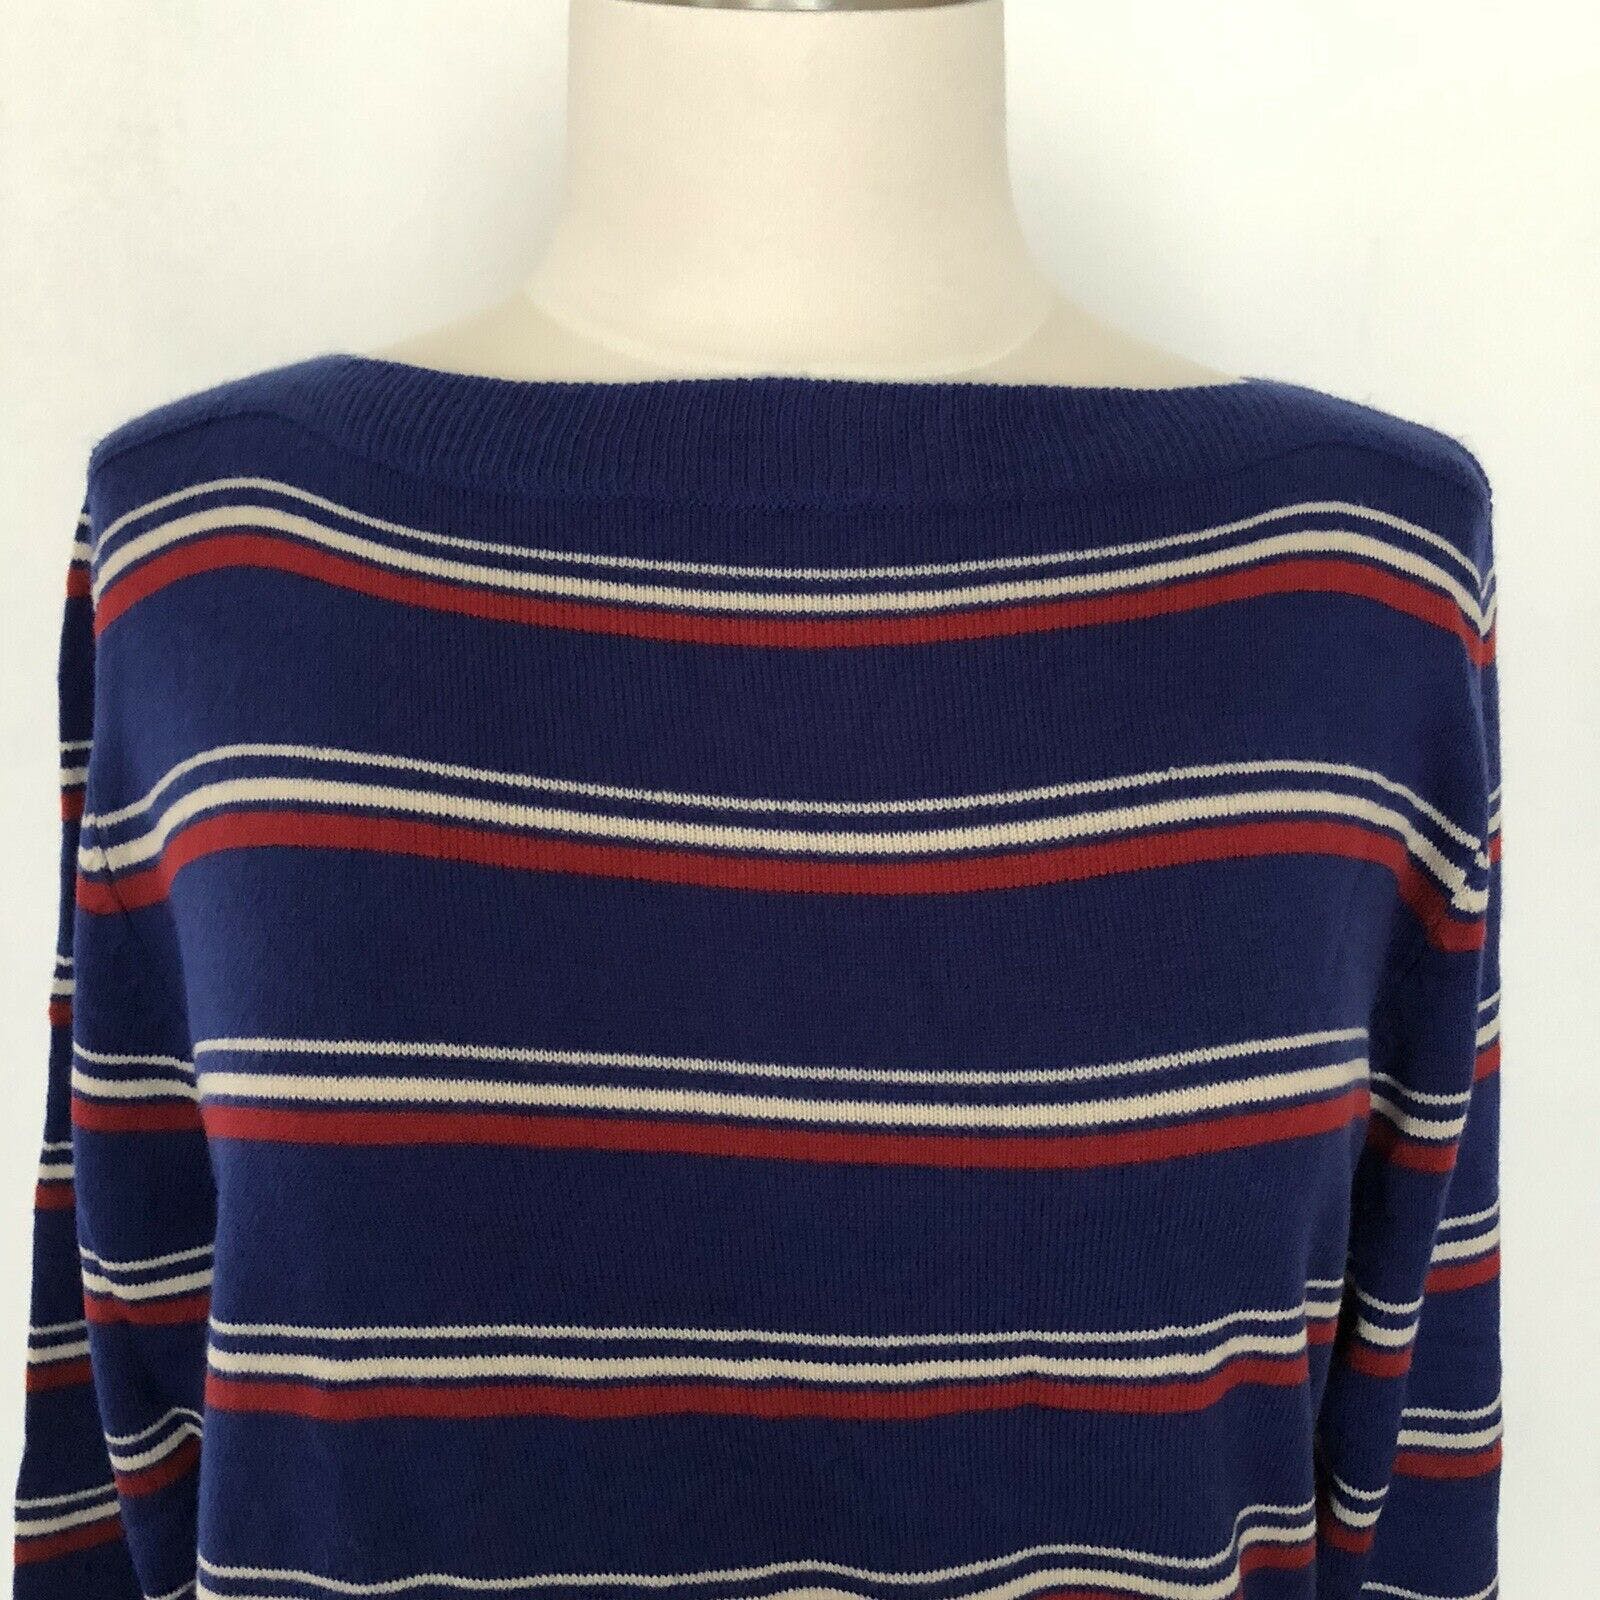 Vintage 70's/80's Blue Red and White Striped Sweater | Shop THRILLING